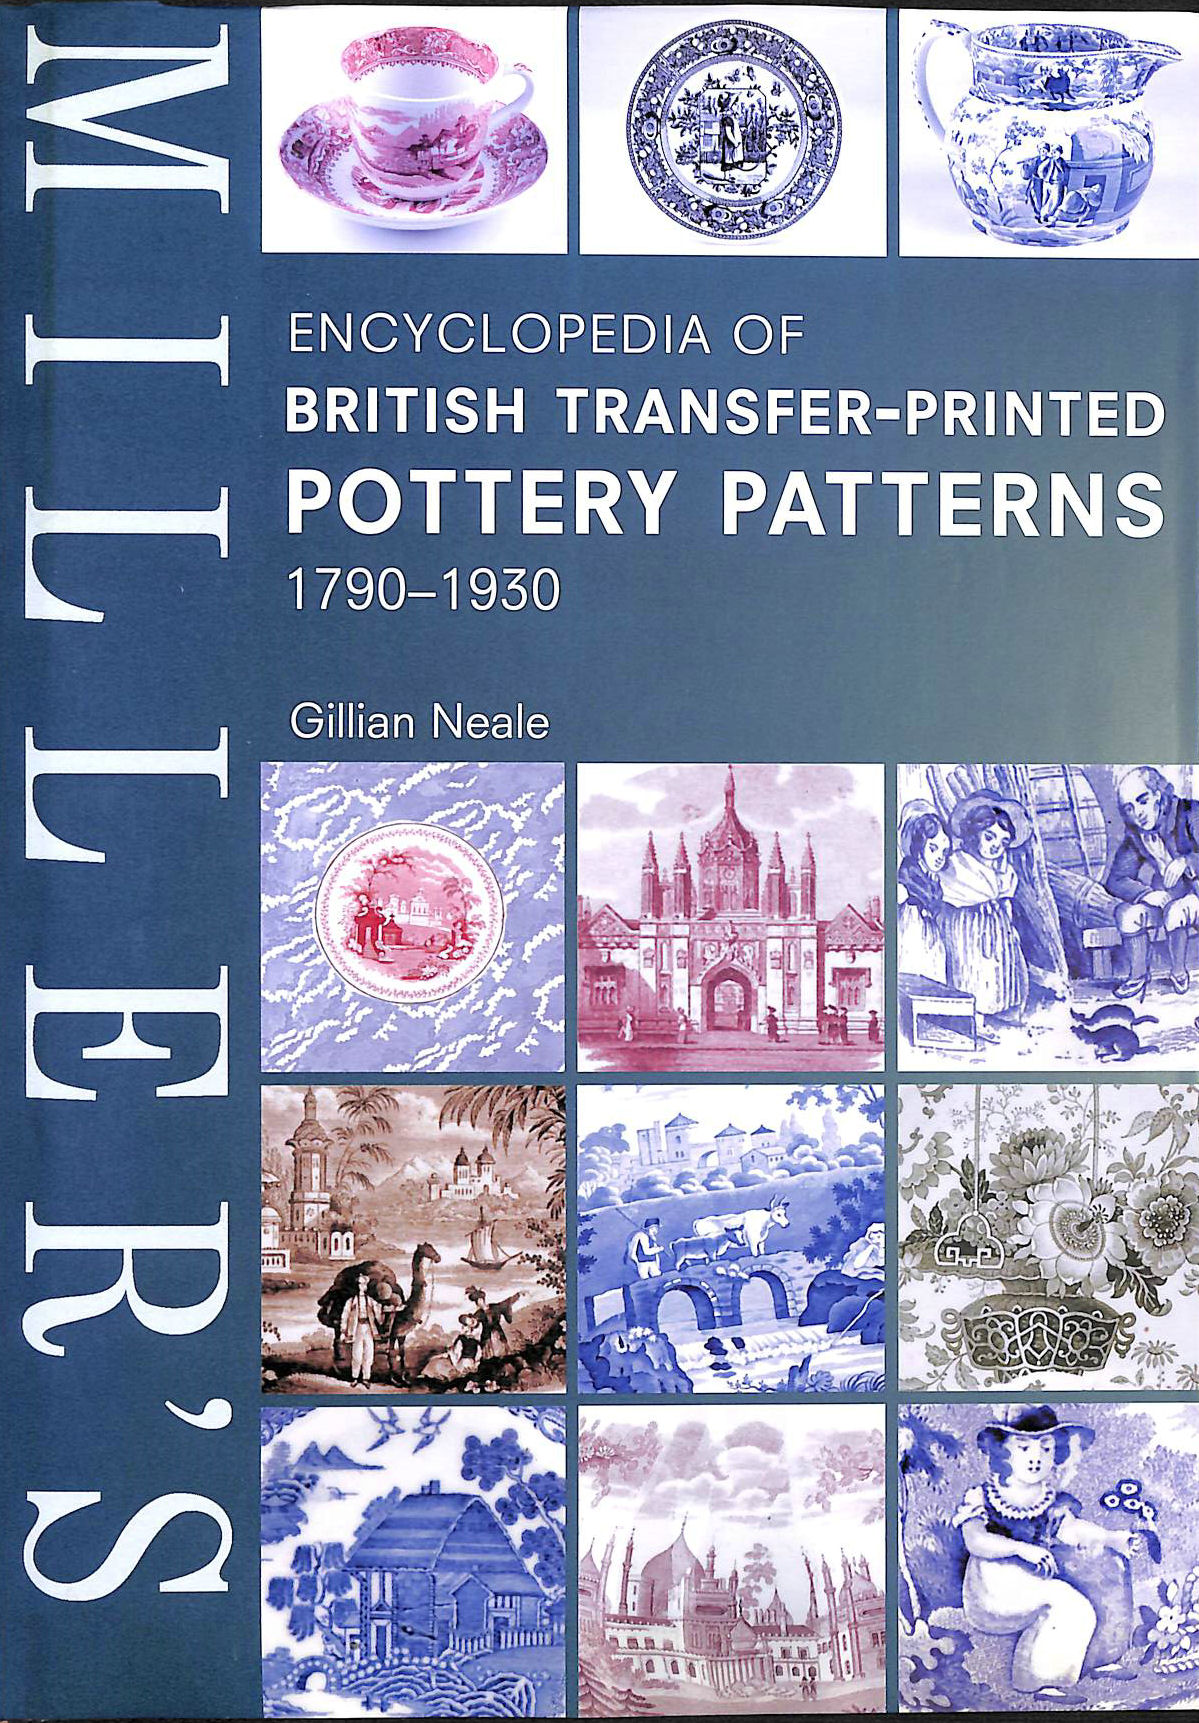 NEALE, GILLIAN - Miller's Encyclopedia of British Transfer-printed Pottery Patterns,1790 - 1930 (Mitchell Beazley Antiques & Collectables)